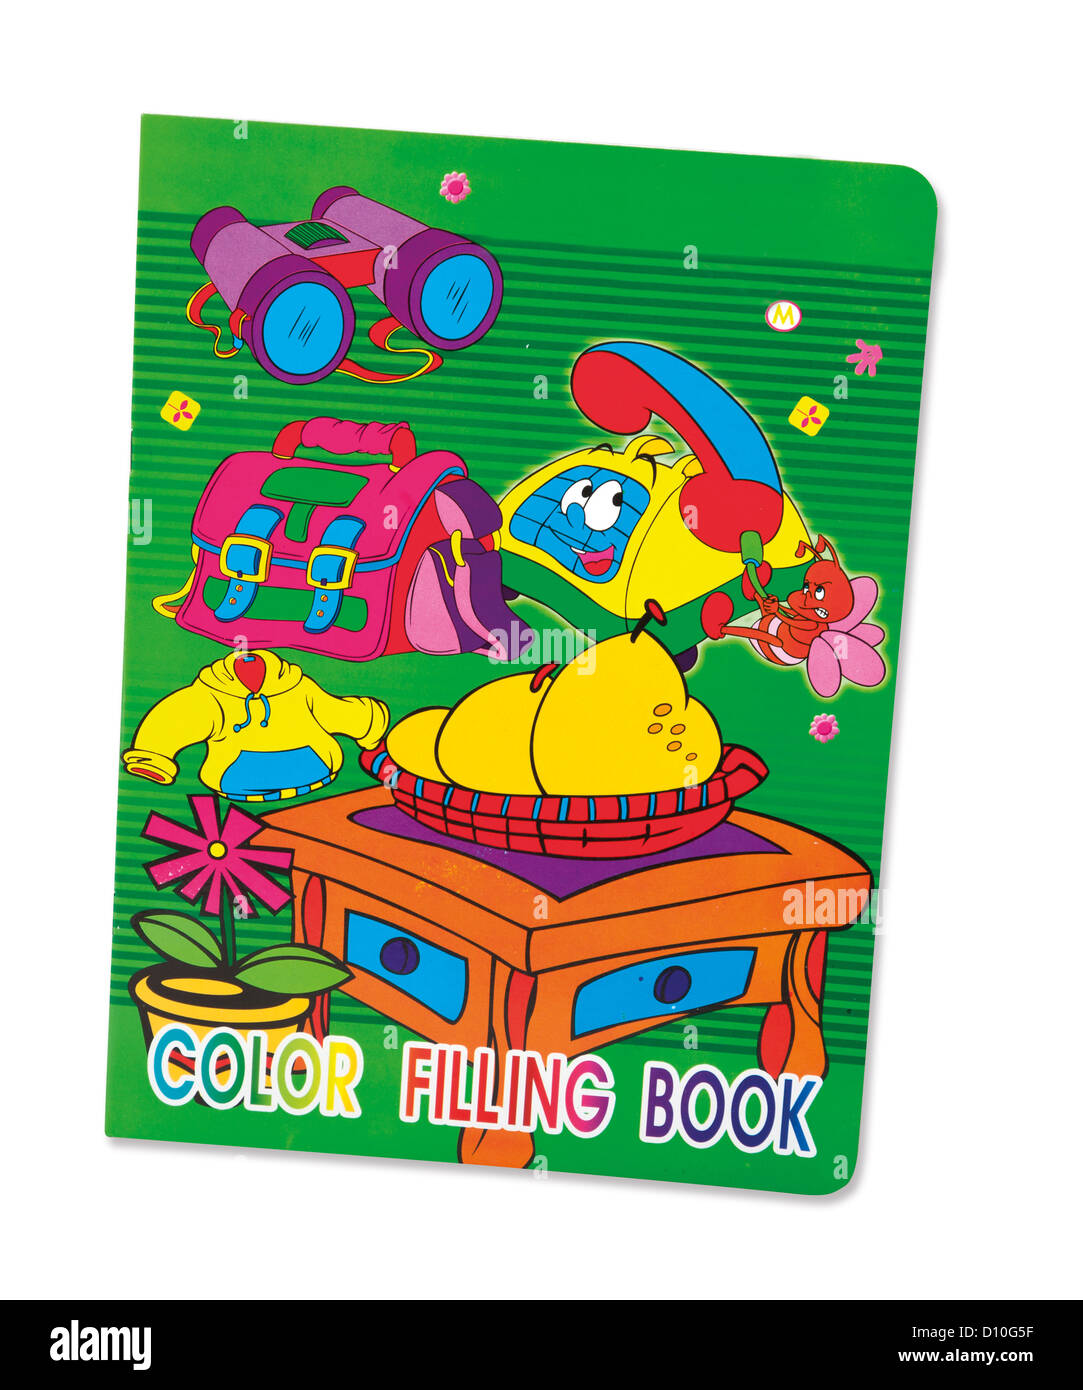 Coloring book Stock Photo